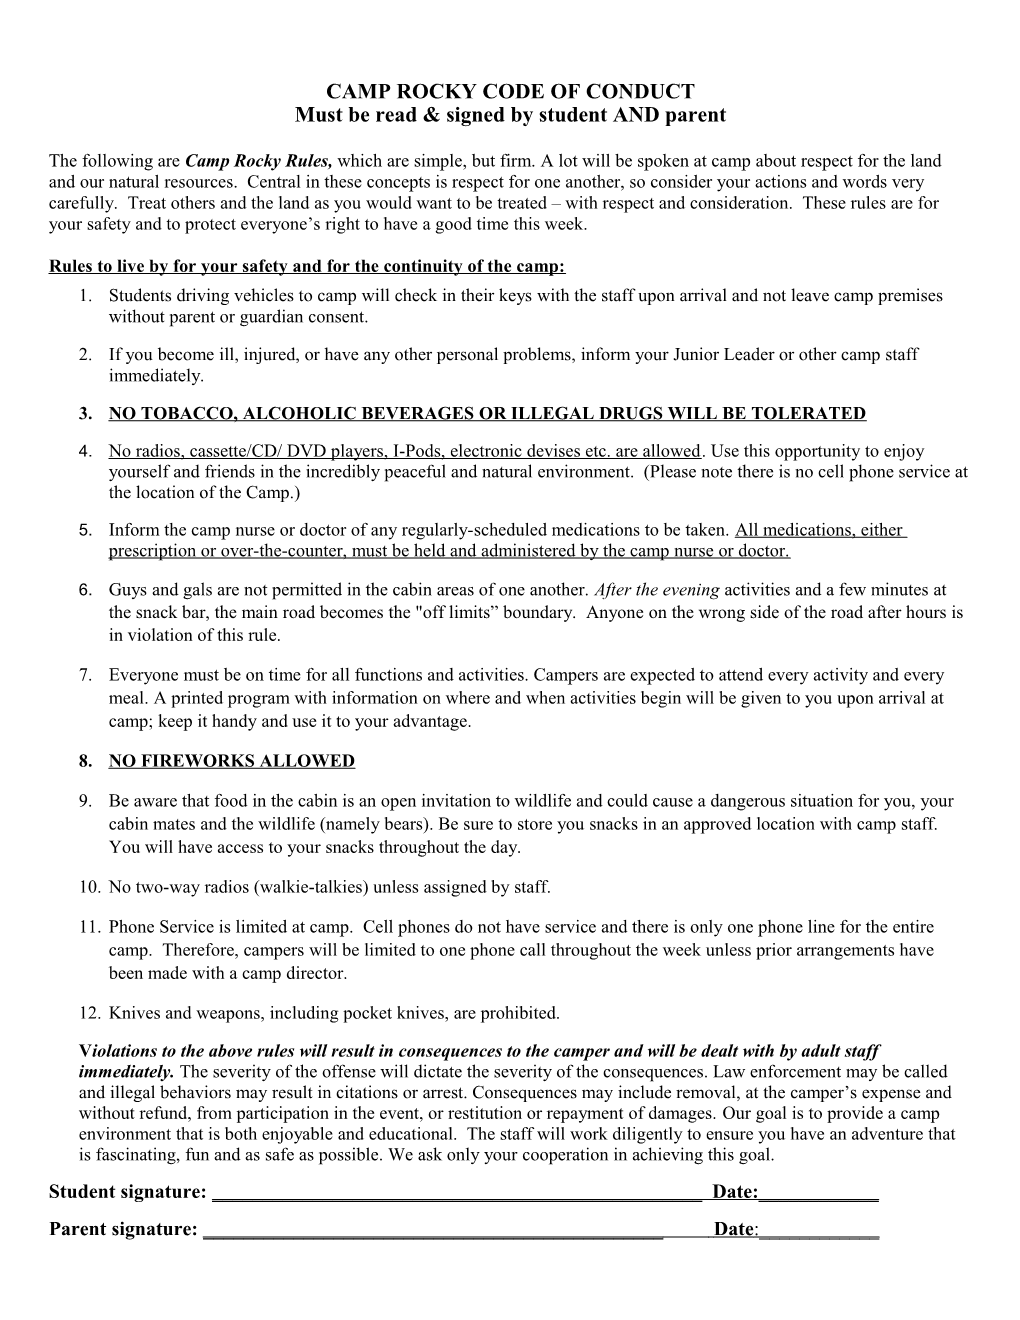 Camp Rocky Code of Conduct